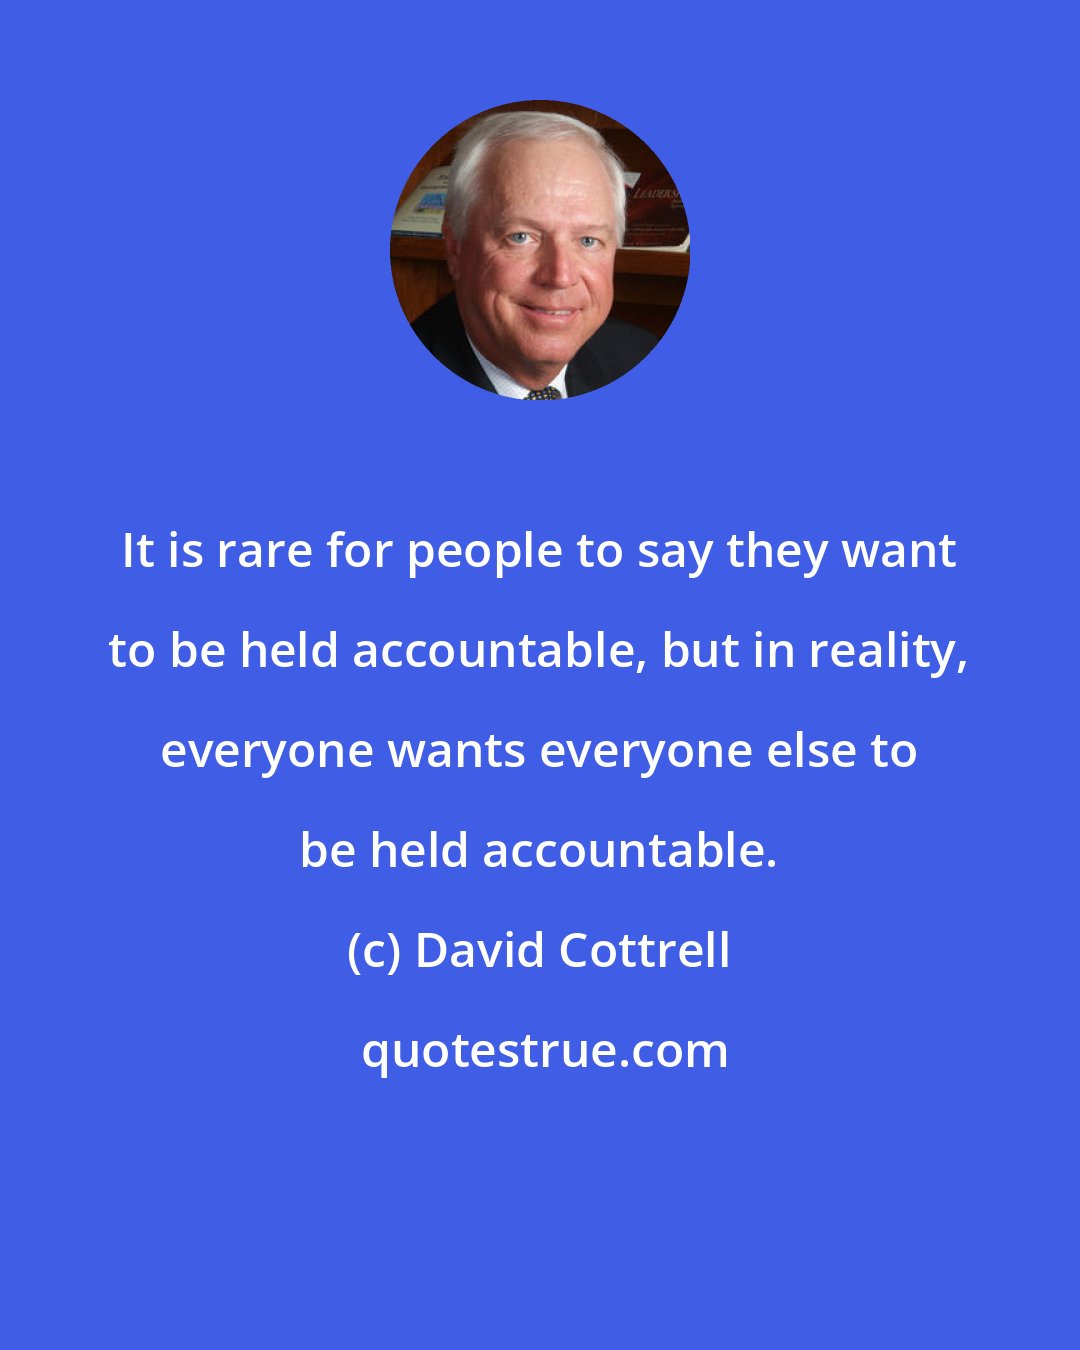 David Cottrell: It is rare for people to say they want to be held accountable, but in reality, everyone wants everyone else to be held accountable.